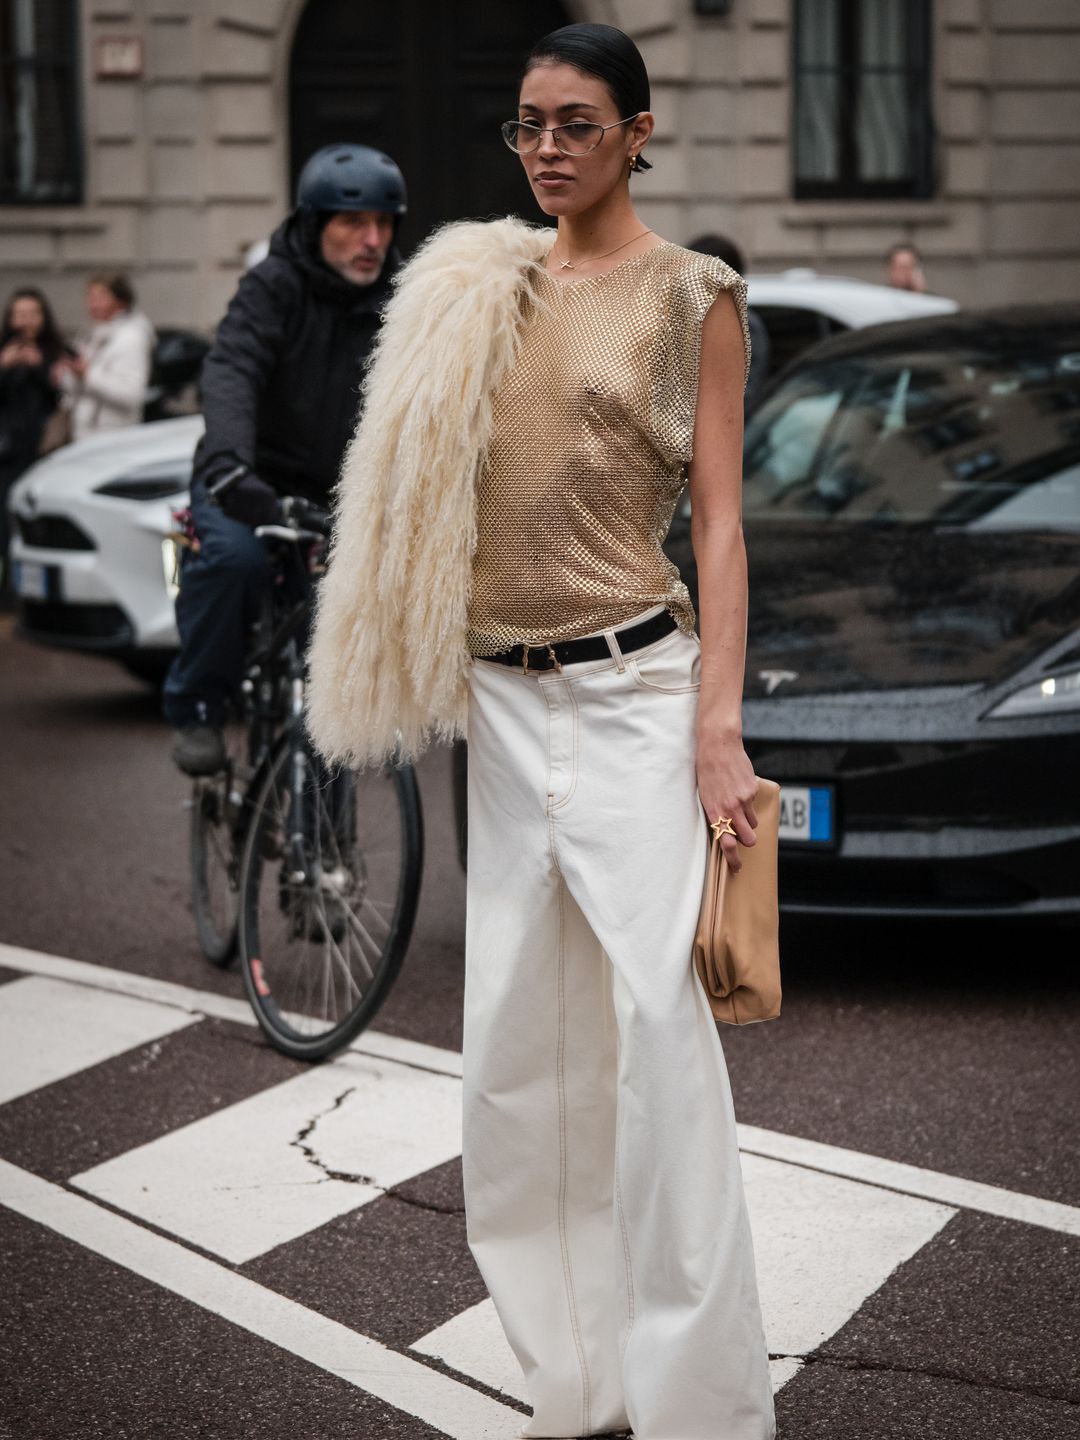 Fashion week guest wearing white jeans with sheer top 